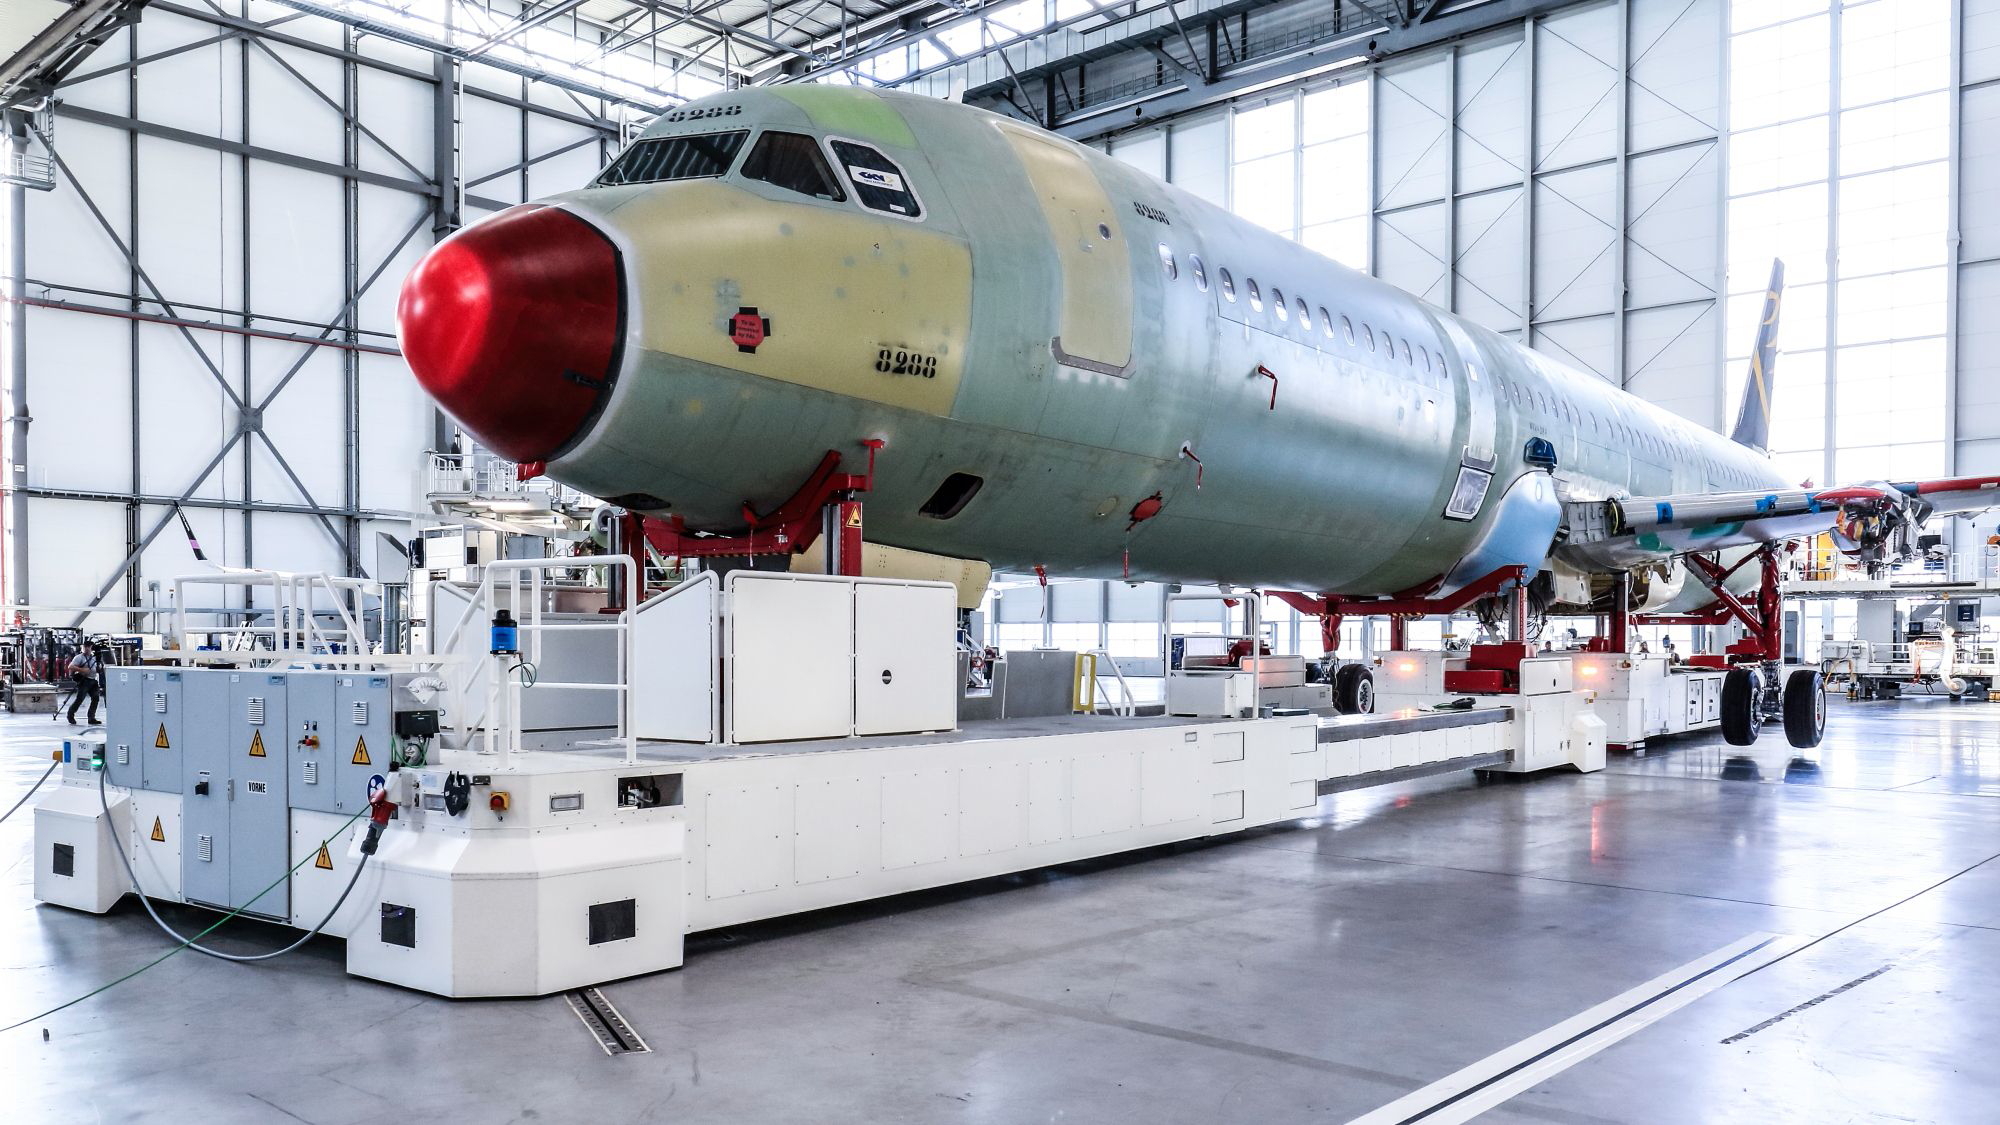 Airbus has inaugurated the fourth Hamburg, Germany A320 Family production line. Making use of digital technologies and a more flexible industrial setup, the innovative state-of-the-art line is a key enabler for ramping up the single-aisle programme to 60 aircraft per month by mid-2019. Click to enlarge.